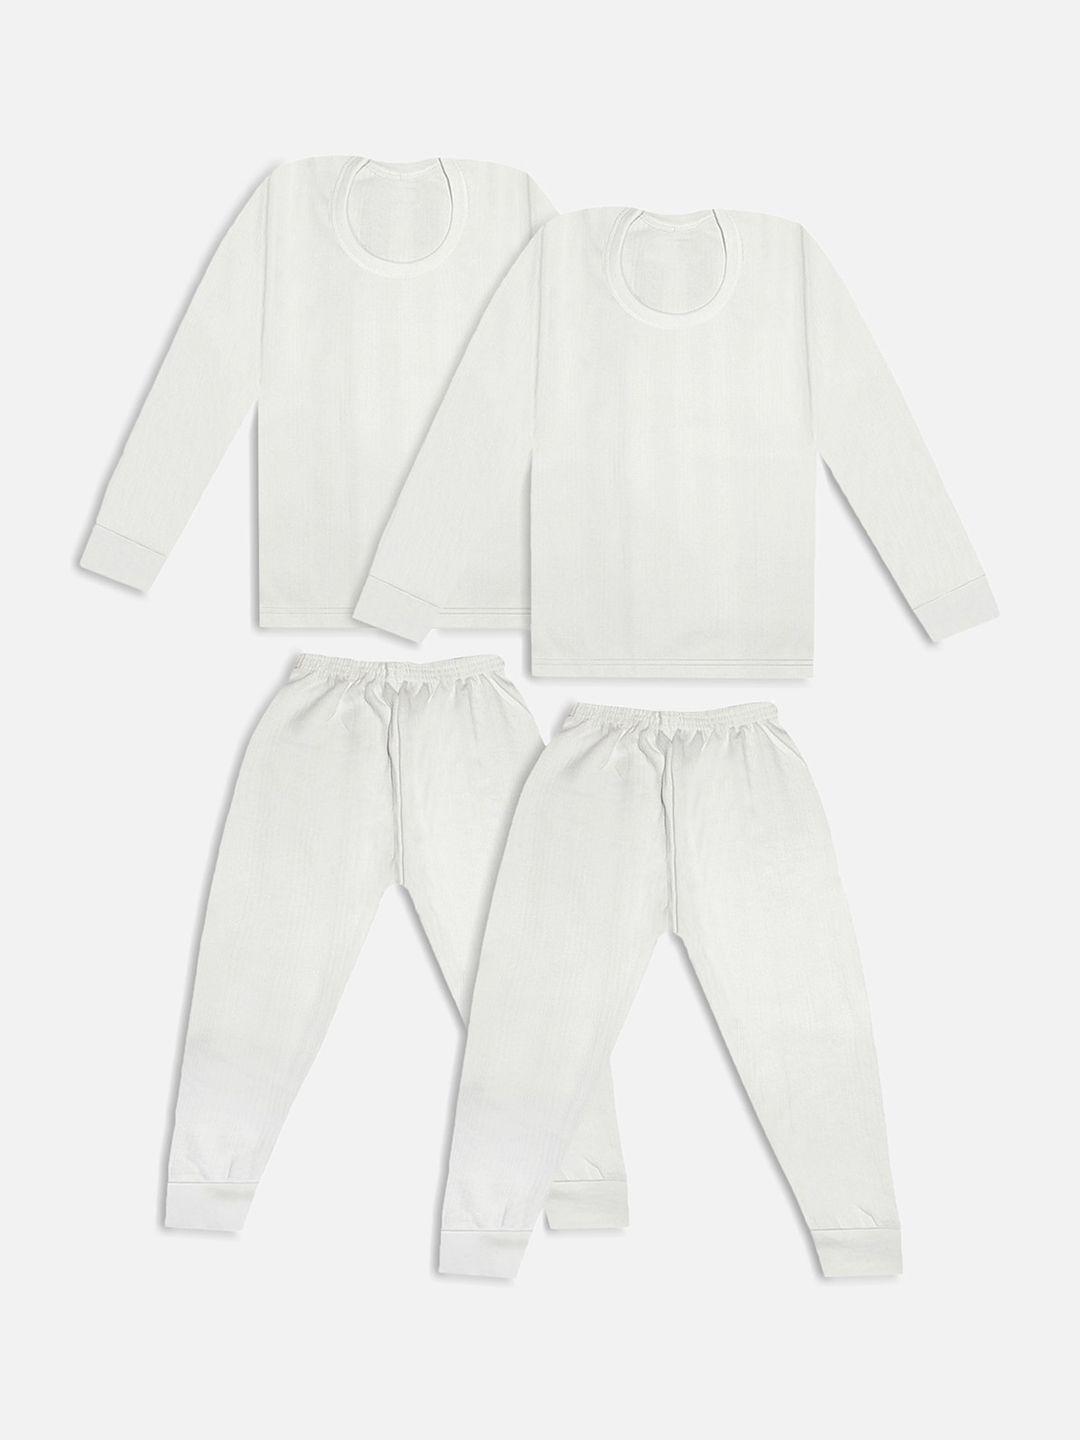 trampoline kids pack of 2 white cotton striped thermal set